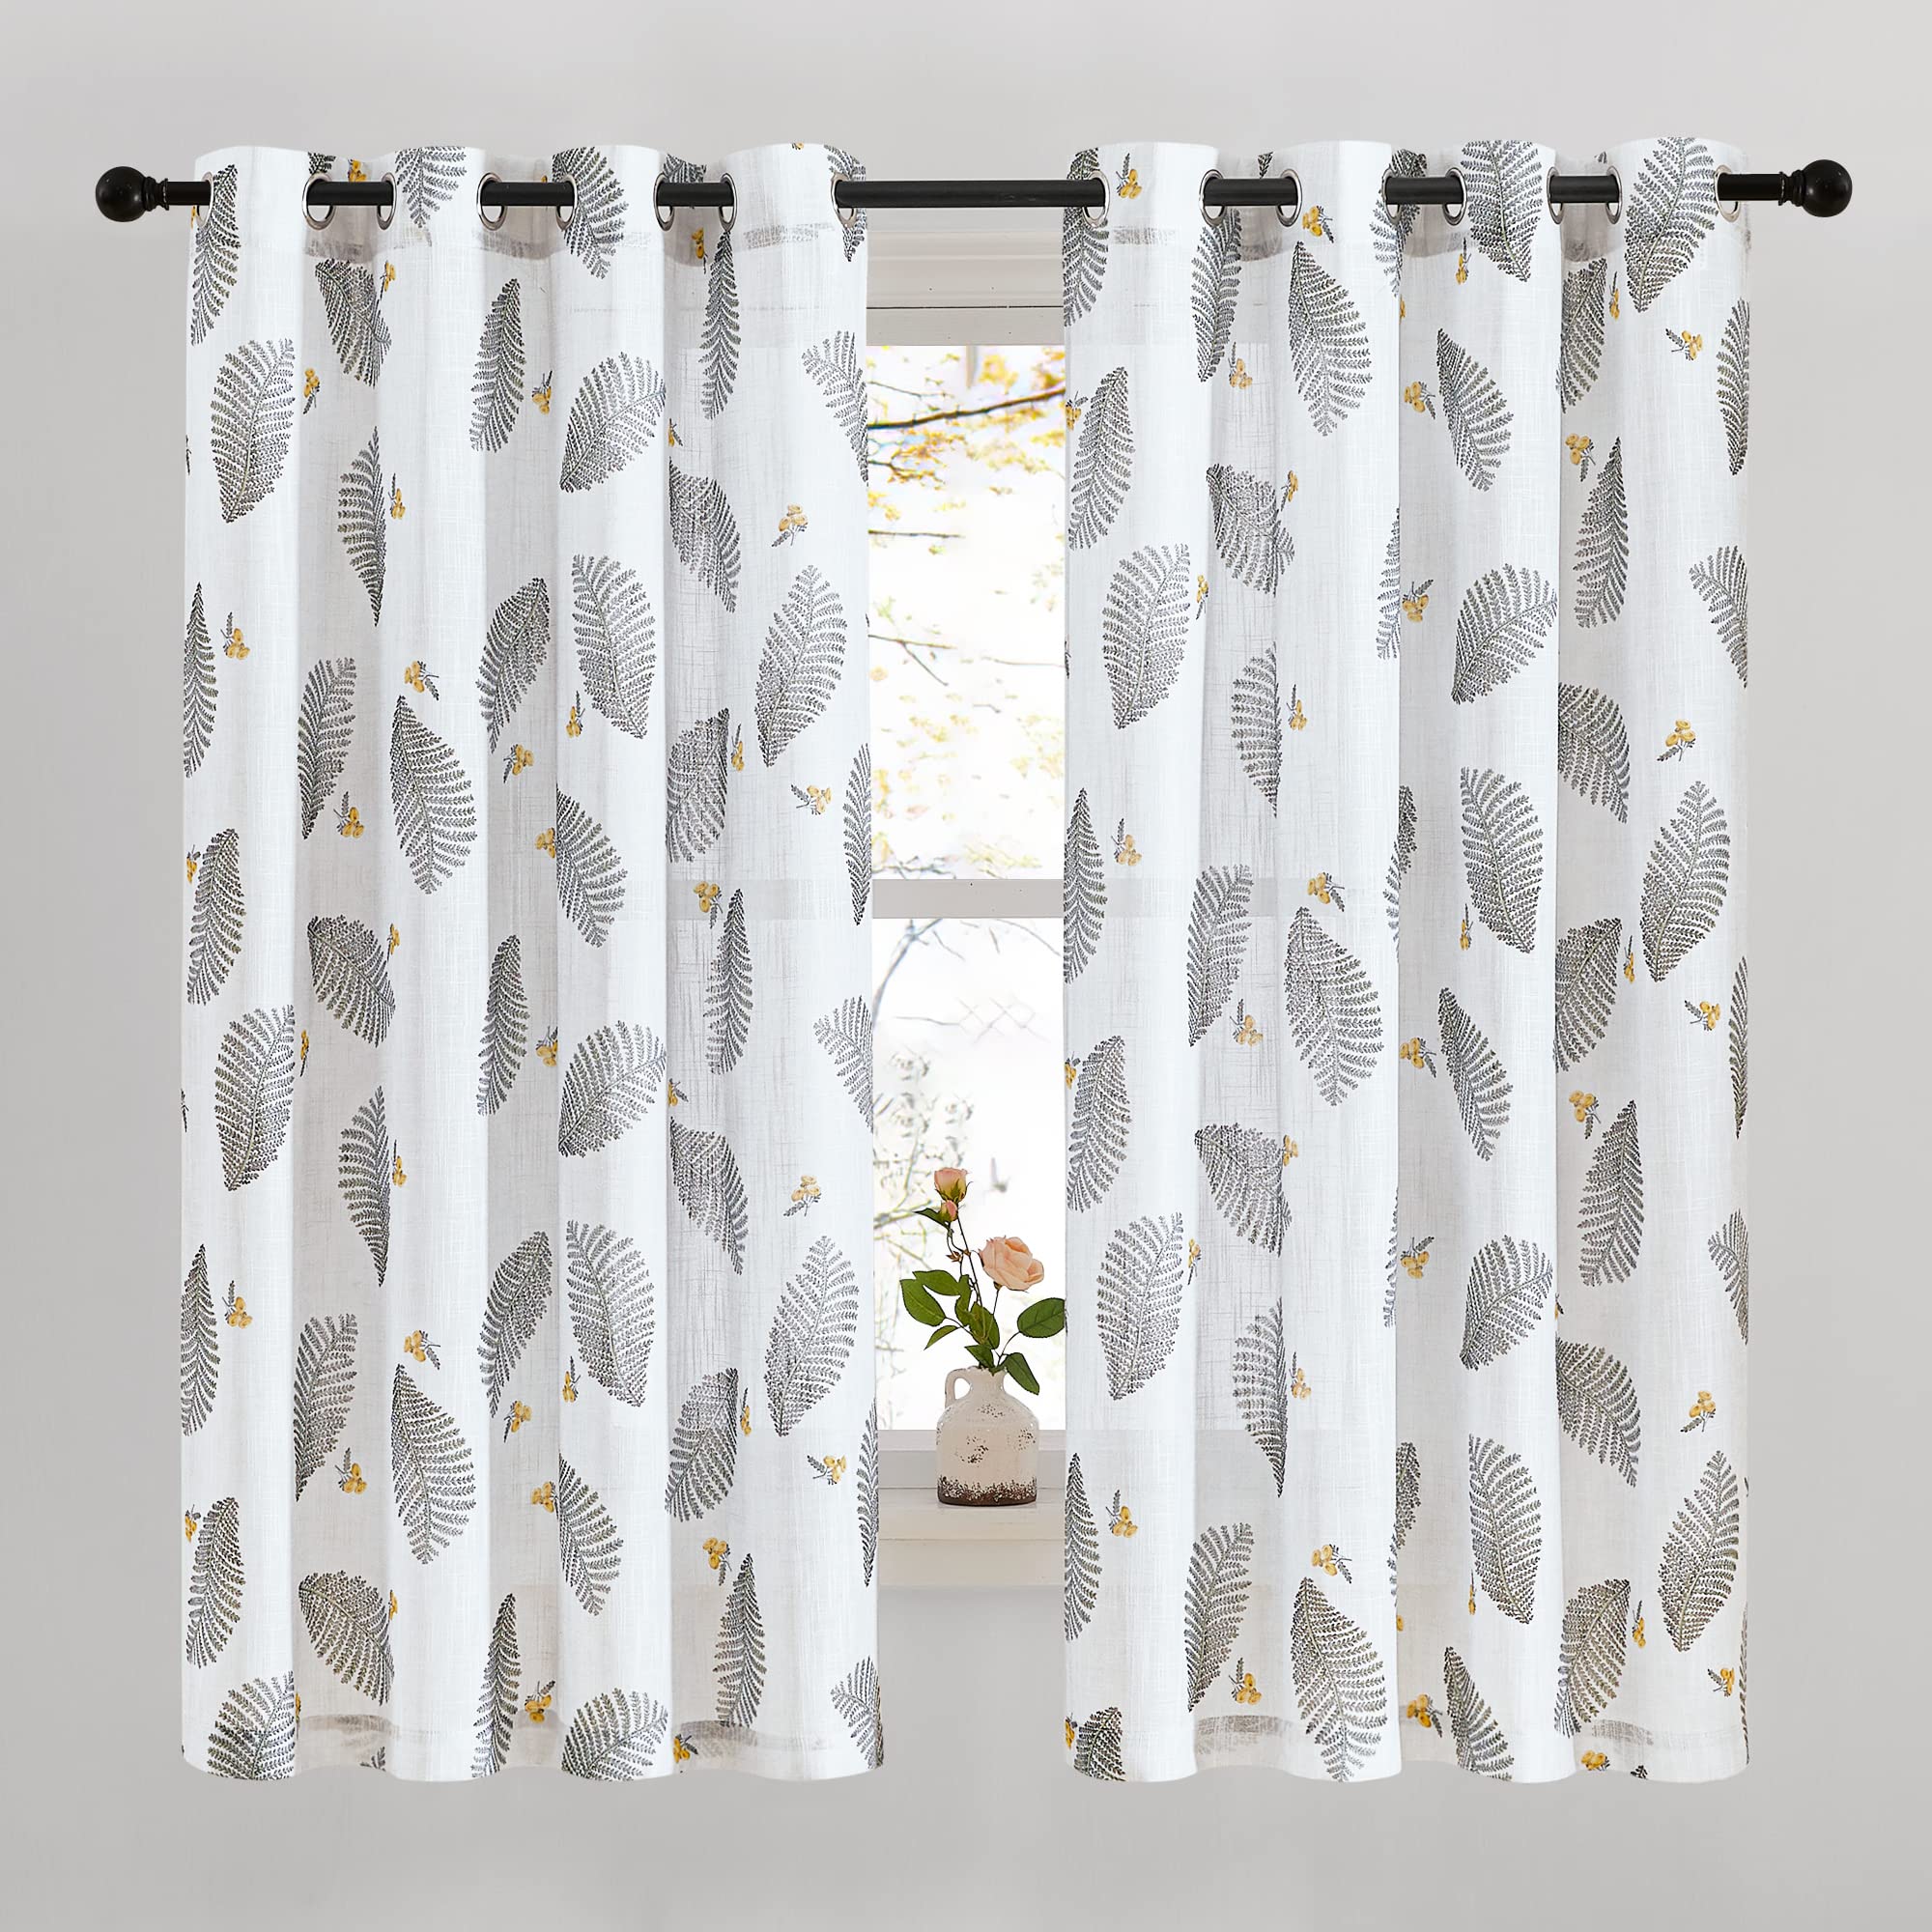 Grommet Floral Sheer Curtains Privacy Linen Curtains For Bedroom 2 Panels KGORGE Store